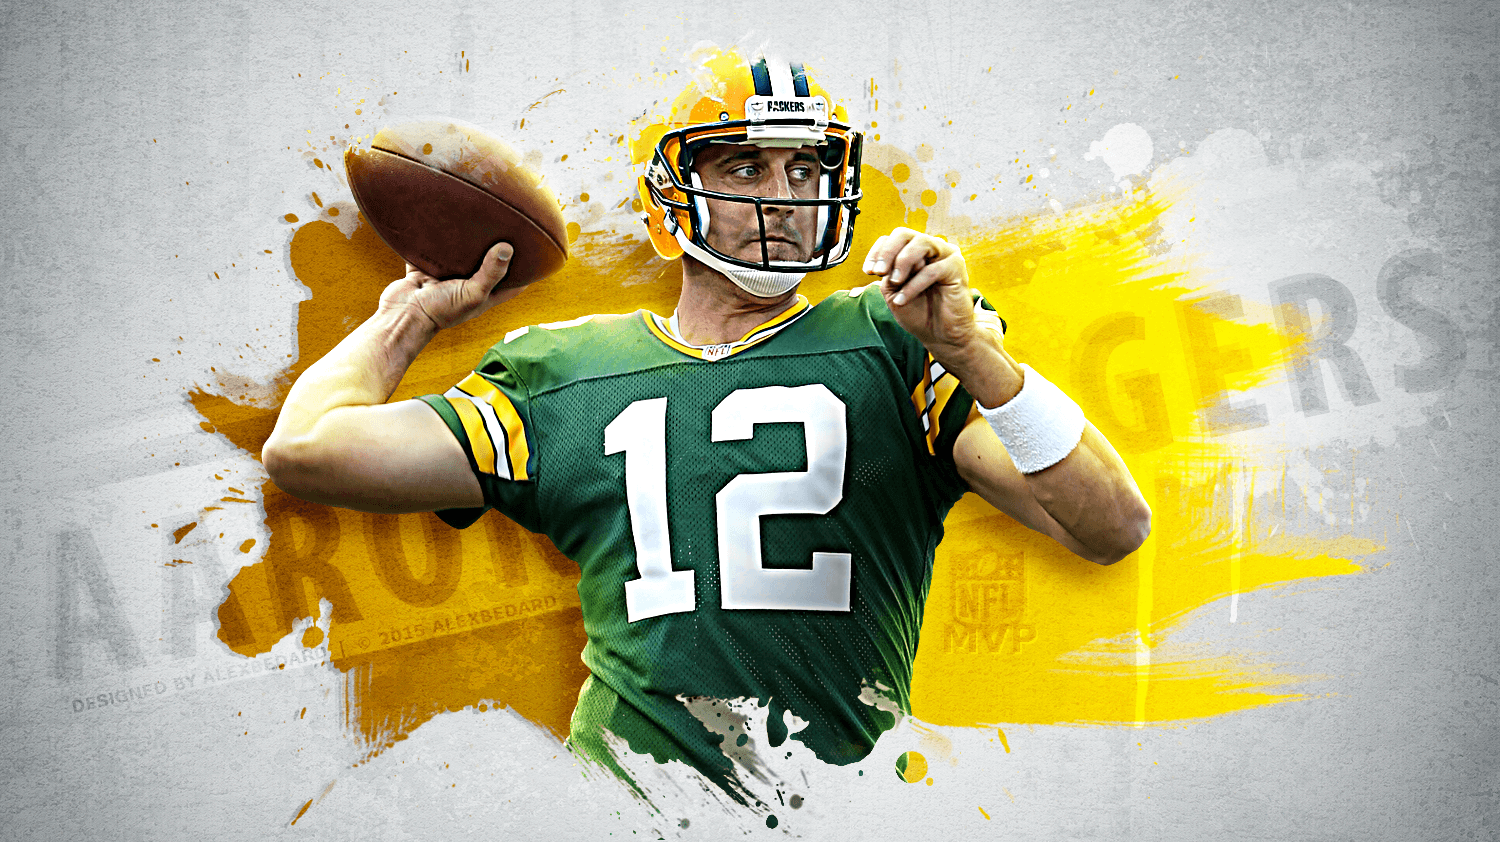 Aaron Rodgers wallpapers by AlexBedard.